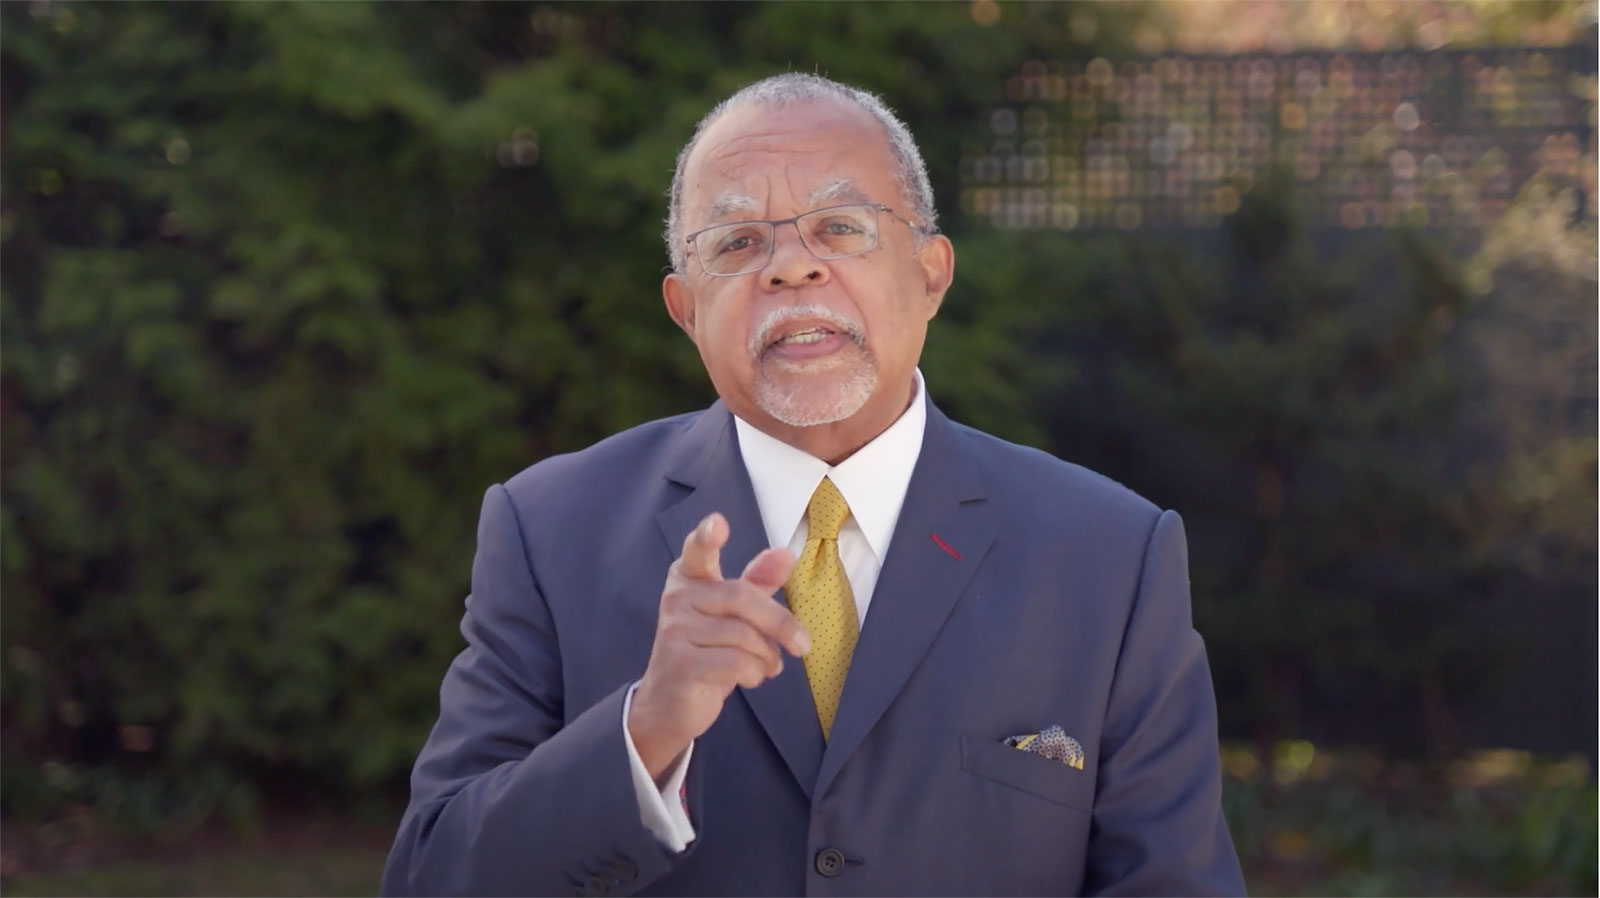 Civil rights activist Henry Louis Gates Jr. gives the commencement address at American University's online ceremony on Saturday.